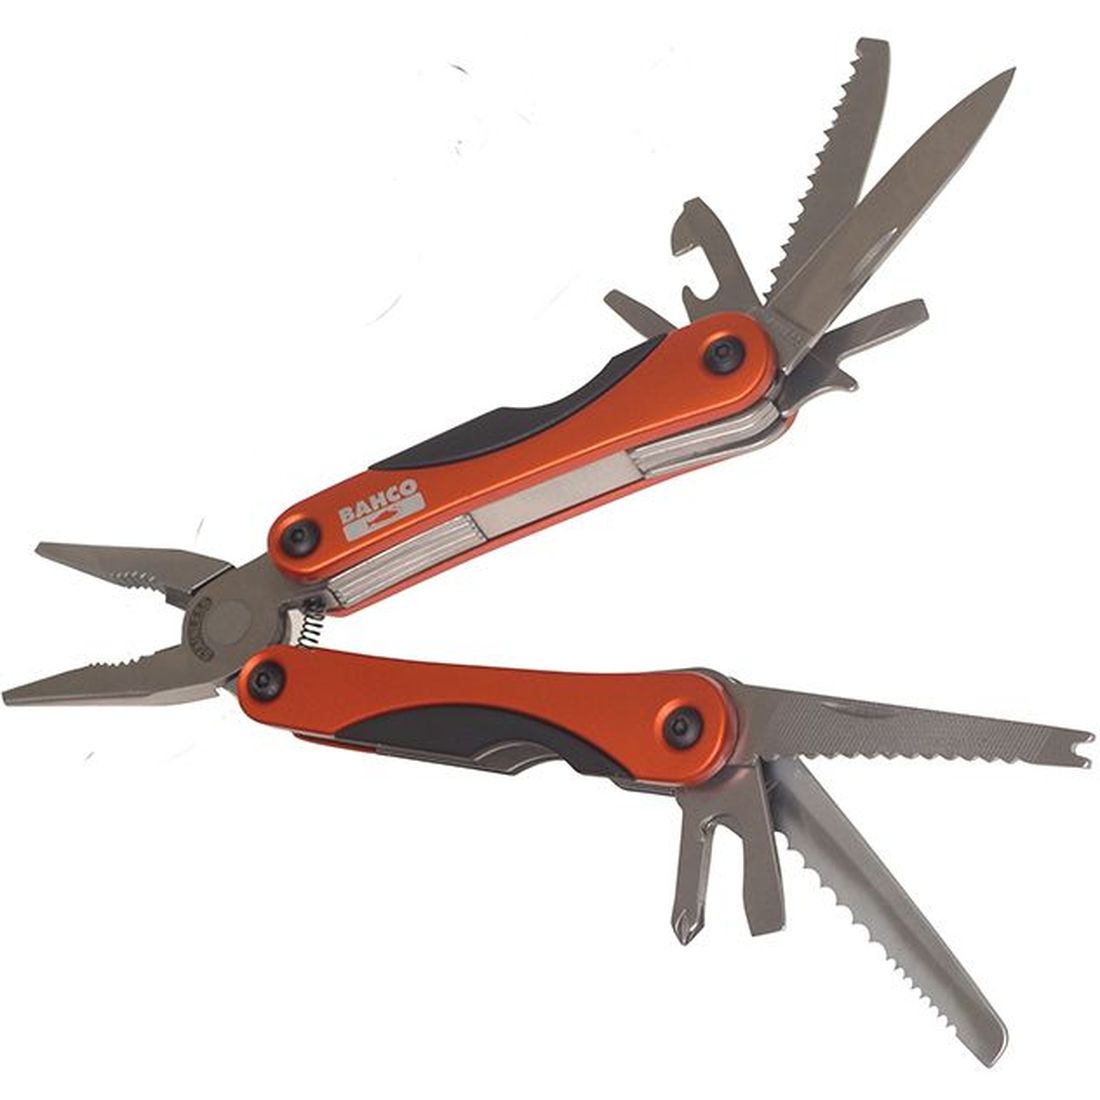 Bahco MTT151 Multi-Tool with Holster    